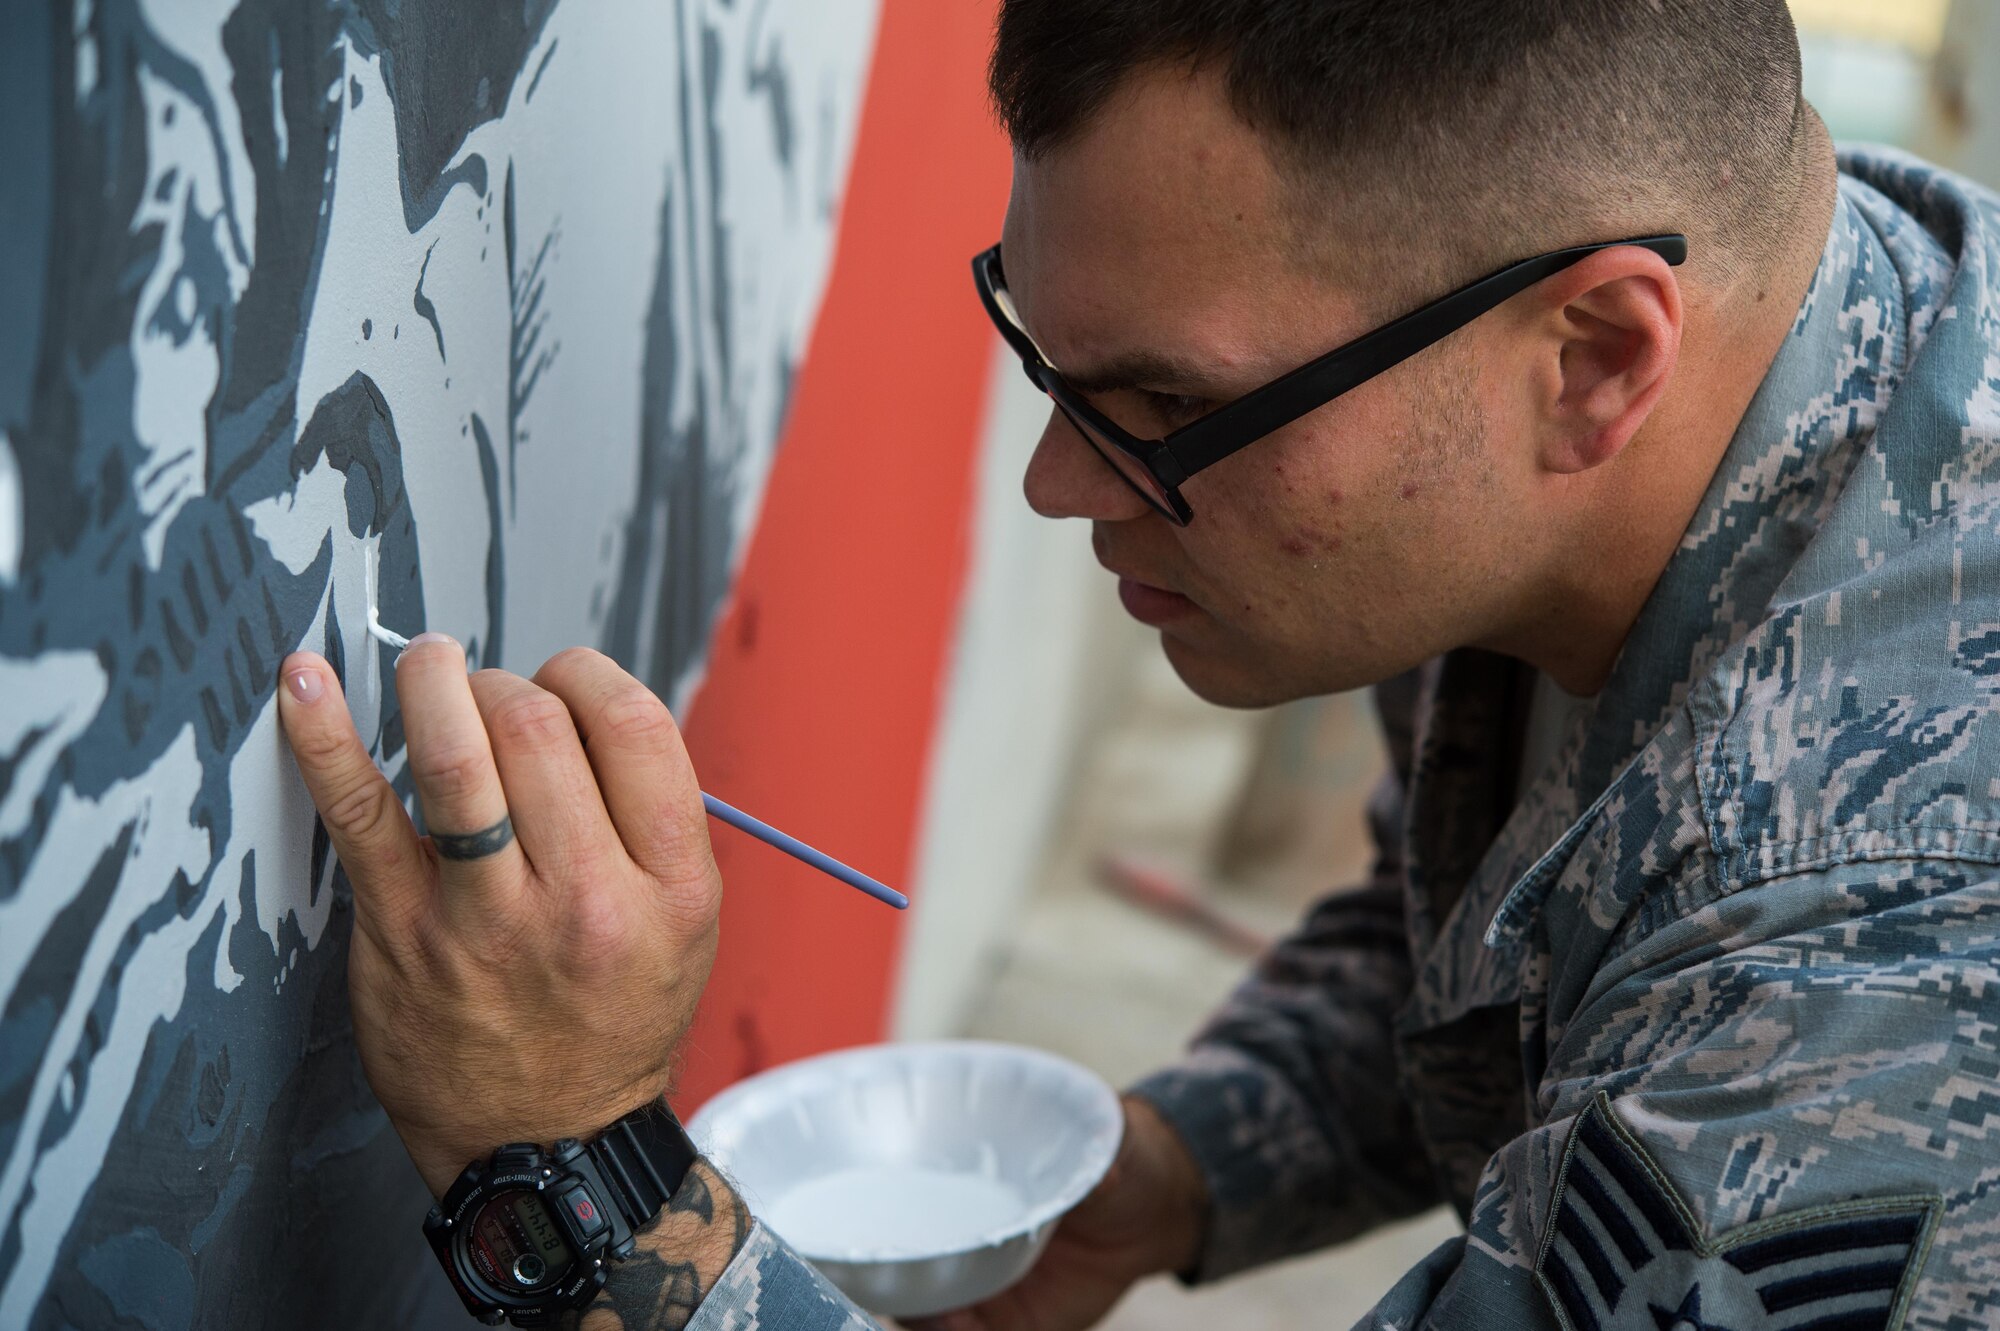 Staff Sgt. Jonathan, a 380th Expeditionary Civil Engineer Squadron firefighter, paints the final touches on a mural at an undisclosed location in Southwest Asia, March 6, 2017. Johnathan dedicated more than 150 hours during his off-duty time to complete the mural while supporting Combined Joint Task Force-Operation Inherent Resolve. (U.S. Air Force photo/Senior Airman Tyler Woodward)